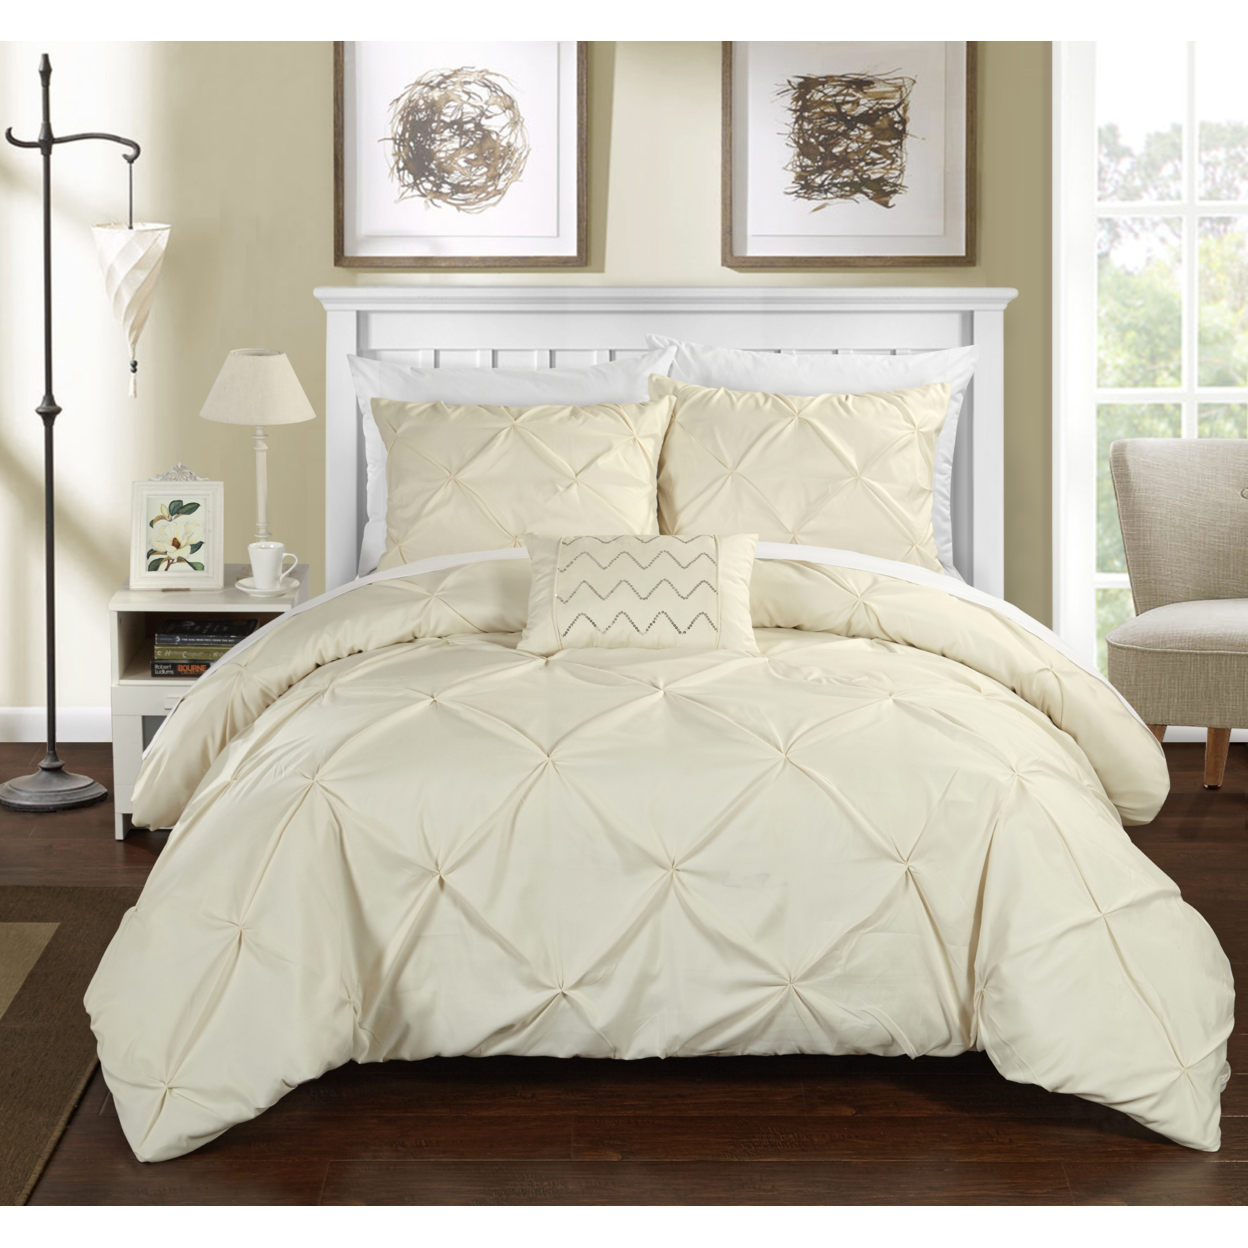 3 Or 4 Piece Whitley Pinch Pleated, Ruffled And Pleated Complete Duvet Cover Set Shams And Decorative Pillows Included - Taupe, Queen